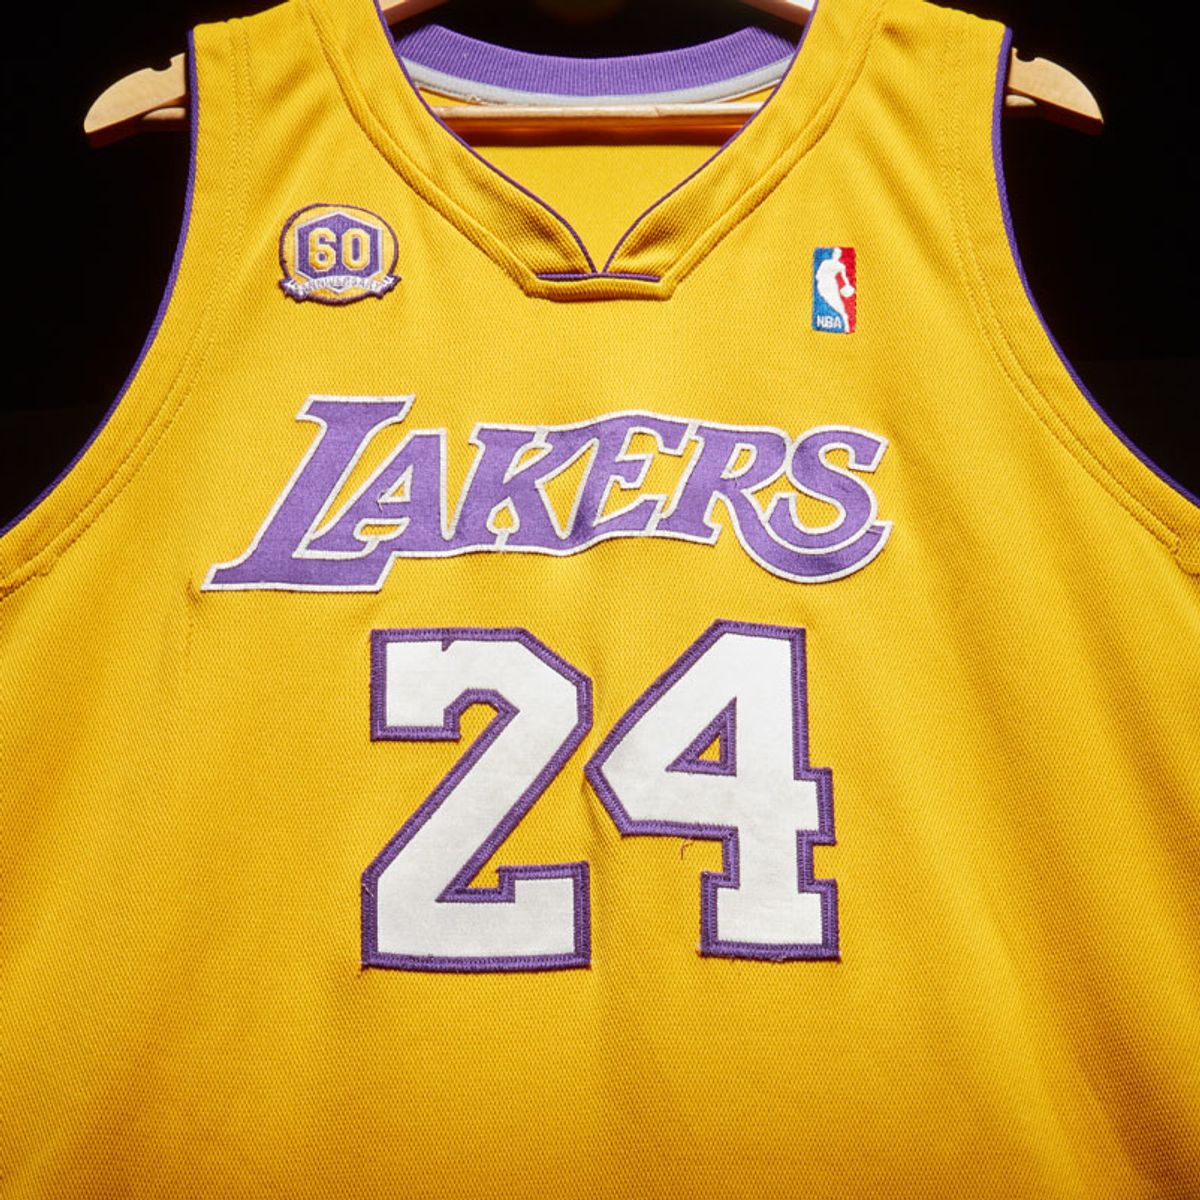 Kobe Bryant rookie Lakers jersey sells for insane $2.73 million